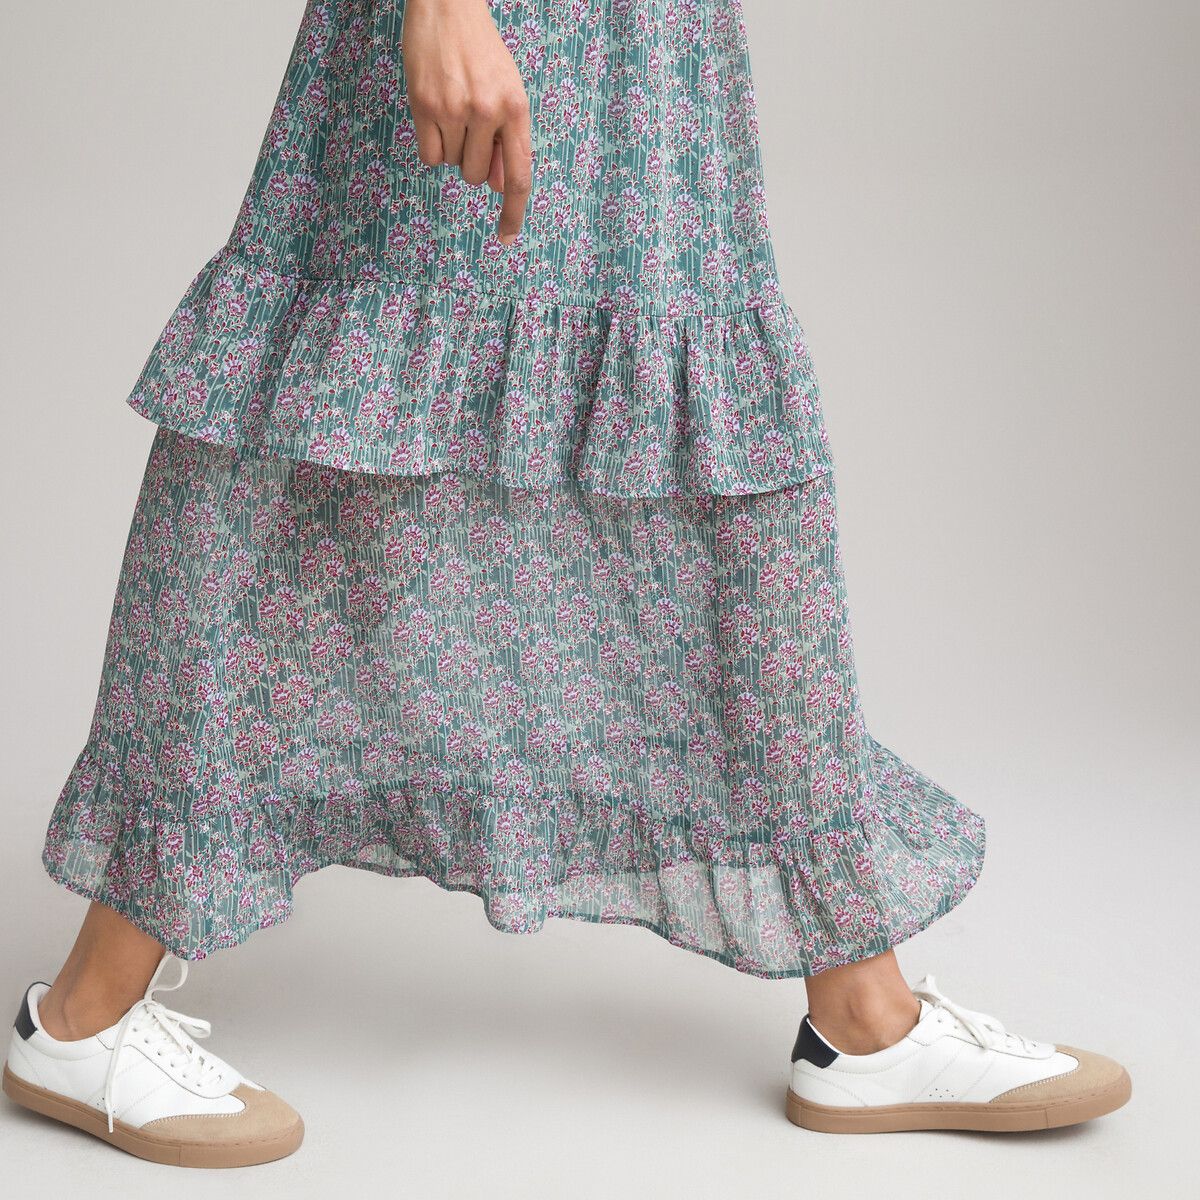 Recycled Tiered Ruffled Skirt in Floral Print Voile | La Redoute (UK)